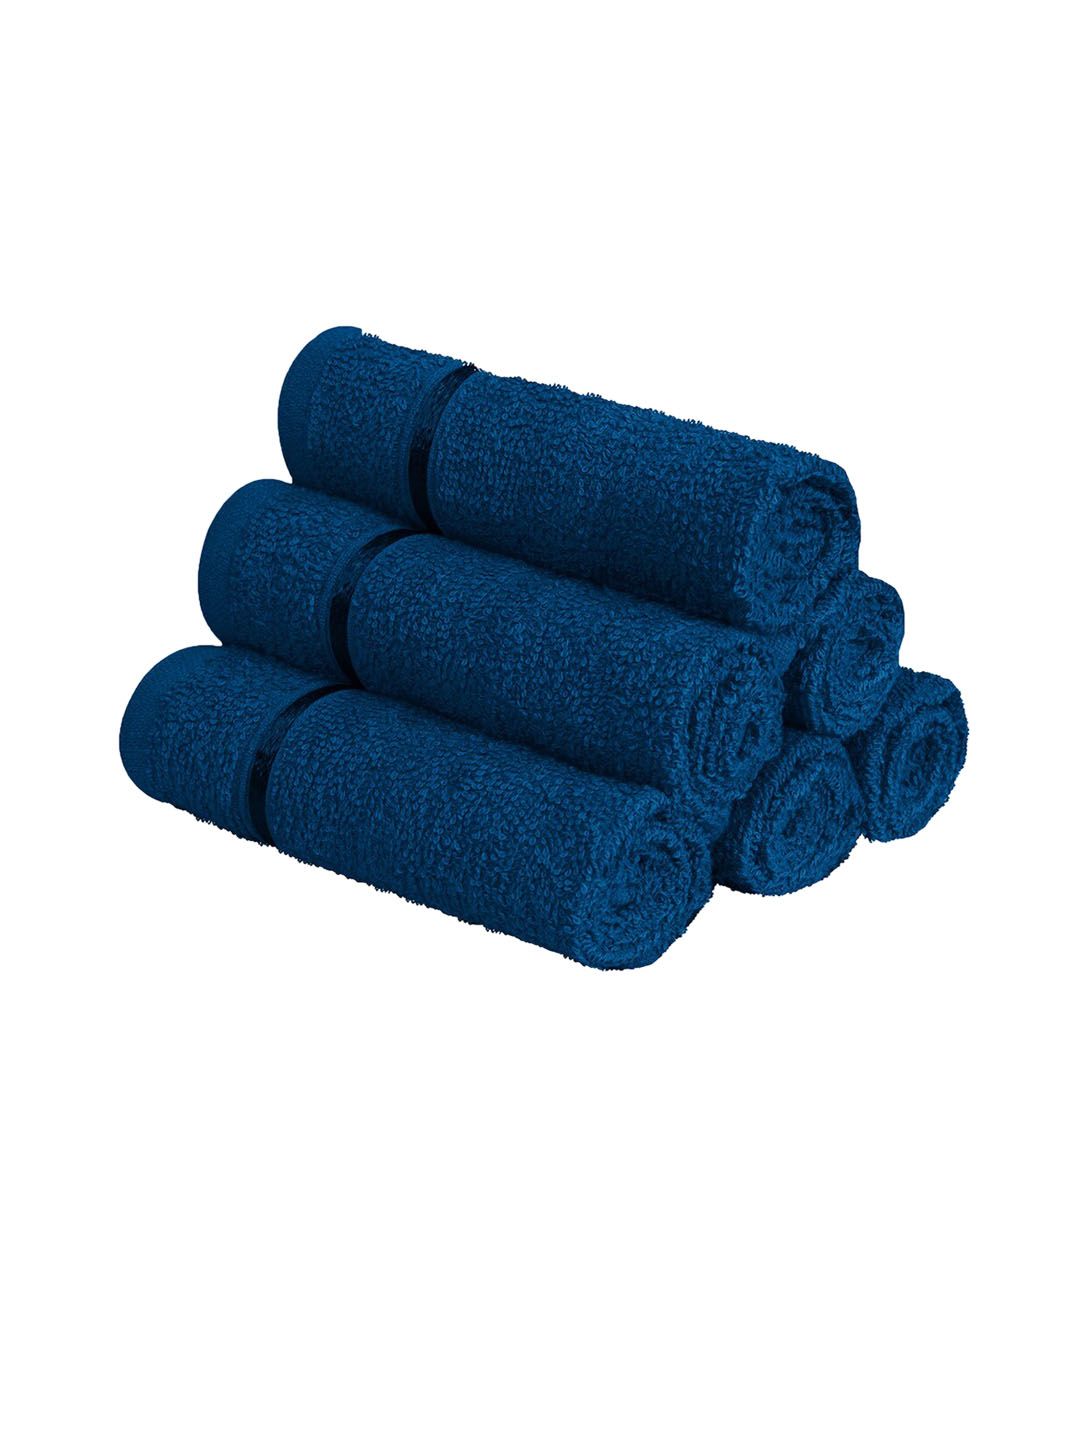 Story@home Set Of 6 Navy Blue Solid Pure Cotton 450 GSM Face Towels Price in India